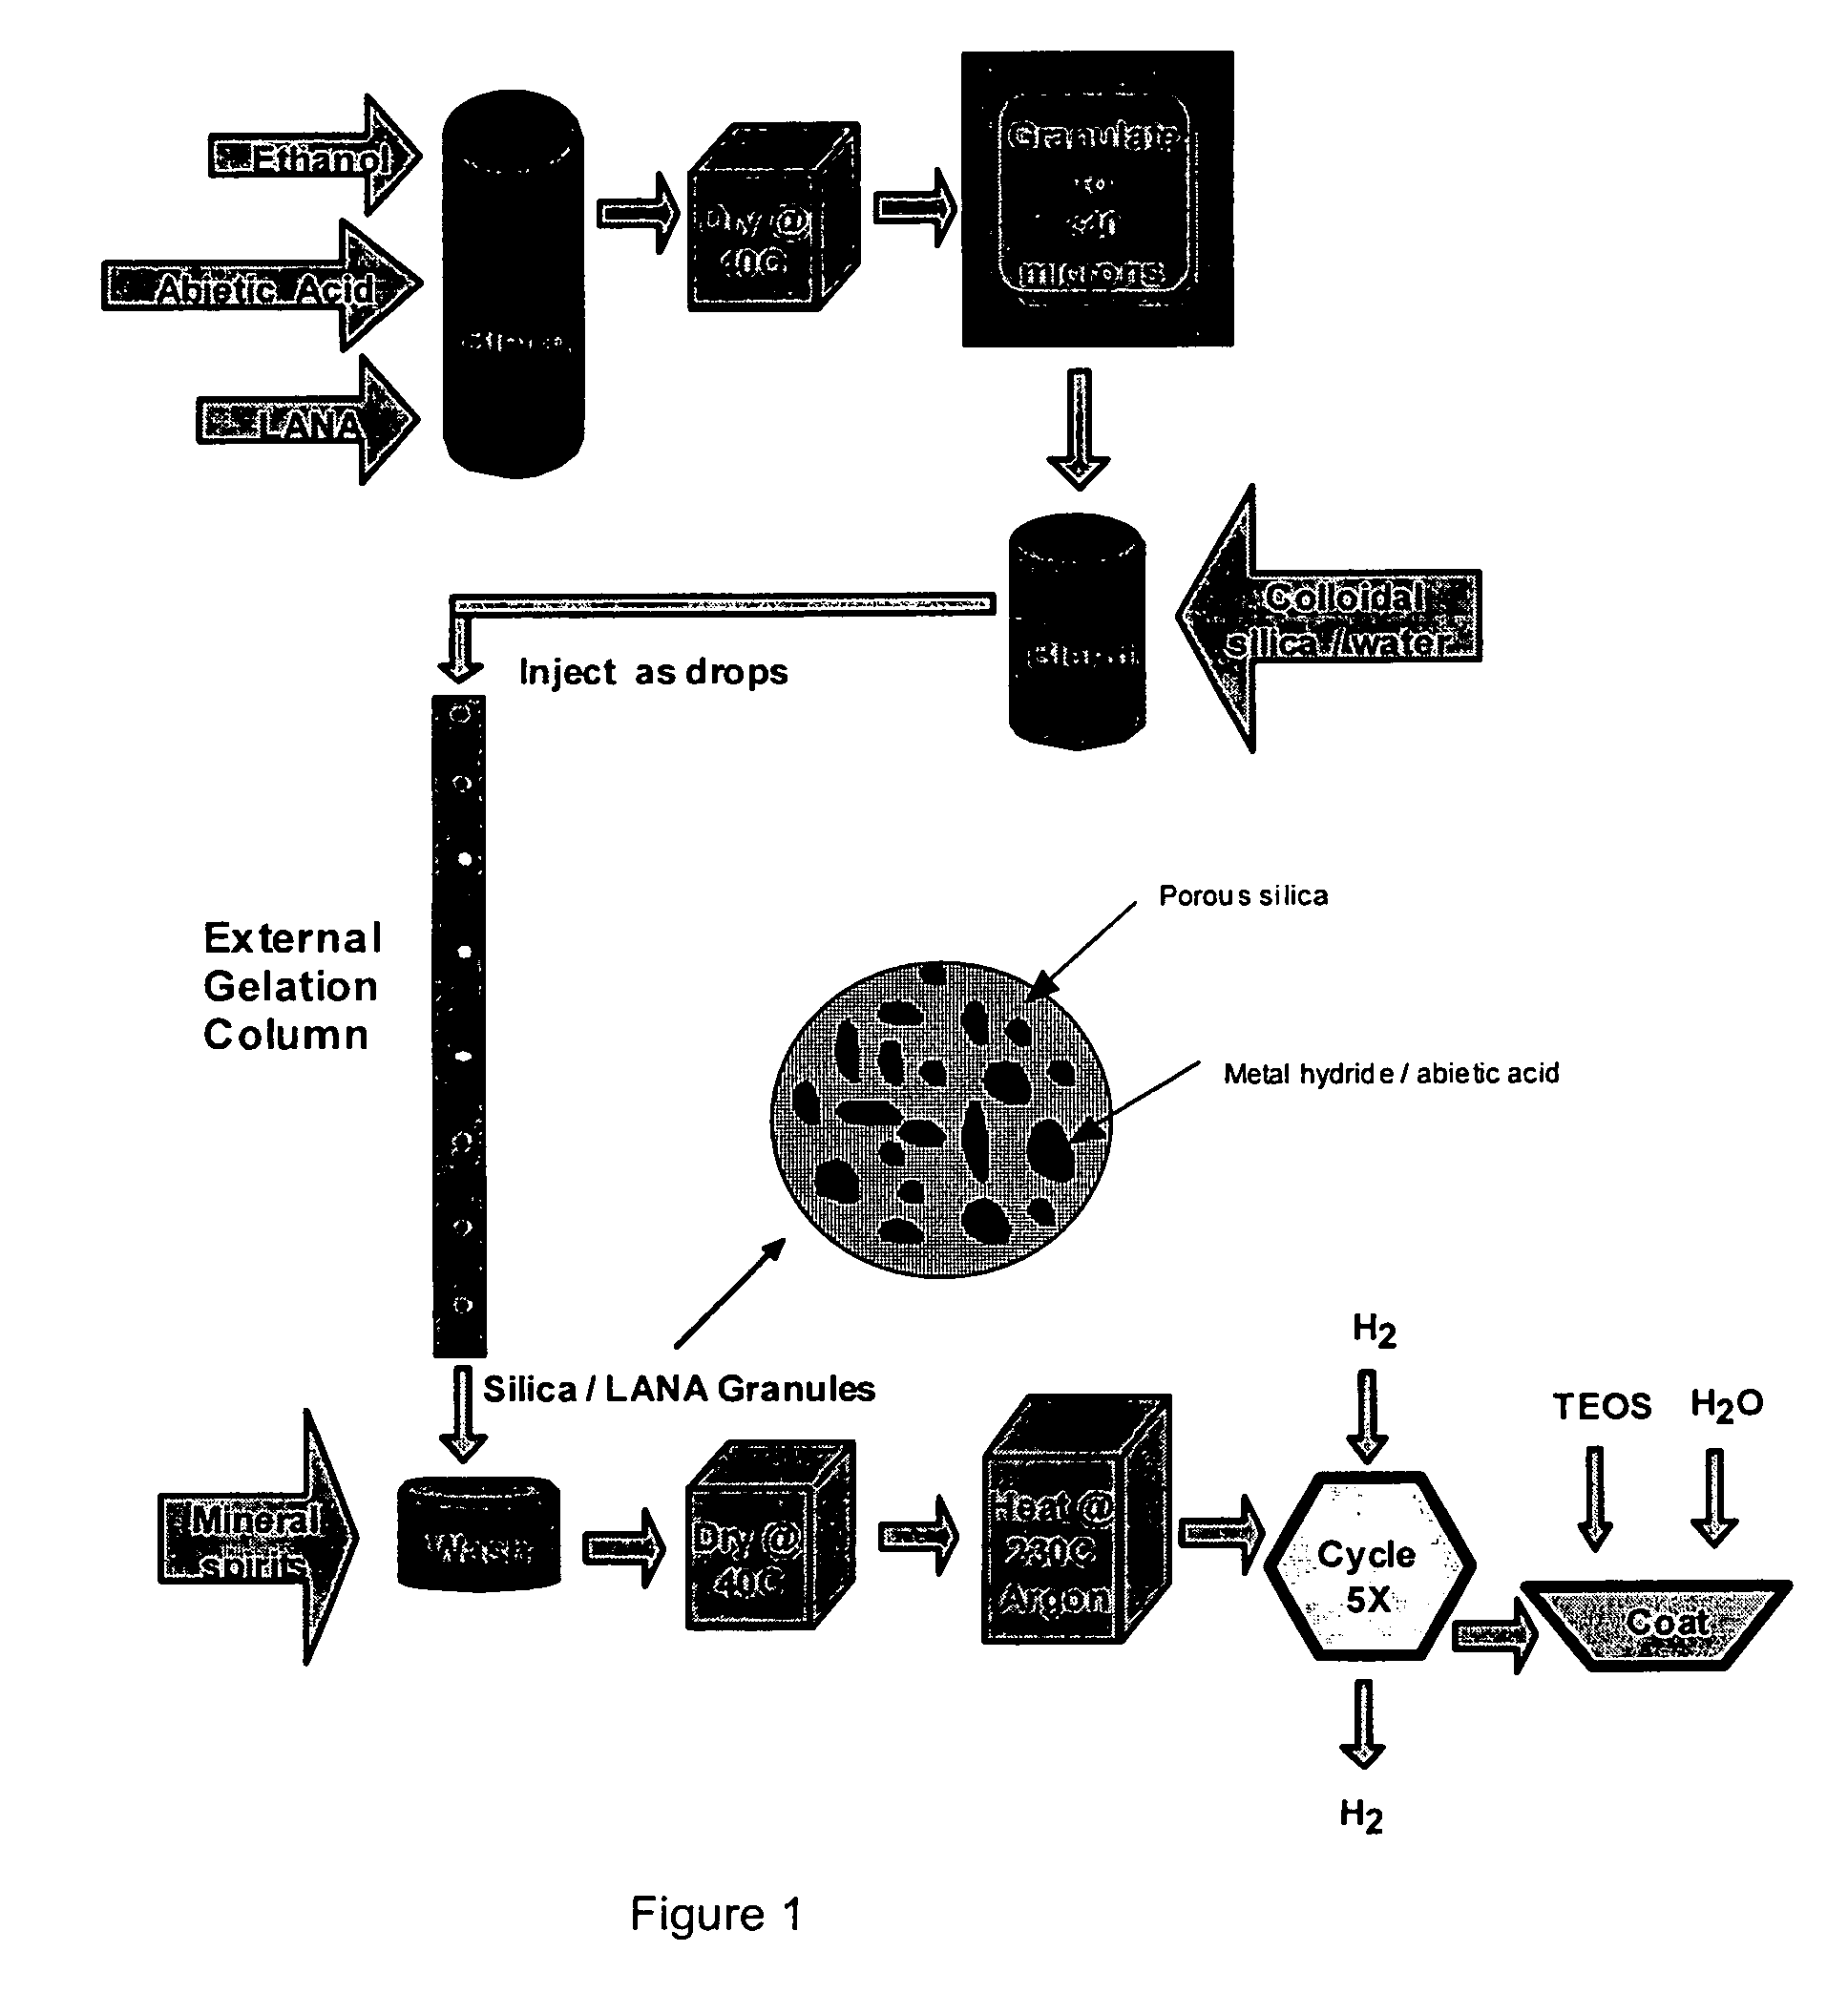 Process of forming a sol-gel/metal hydride composite